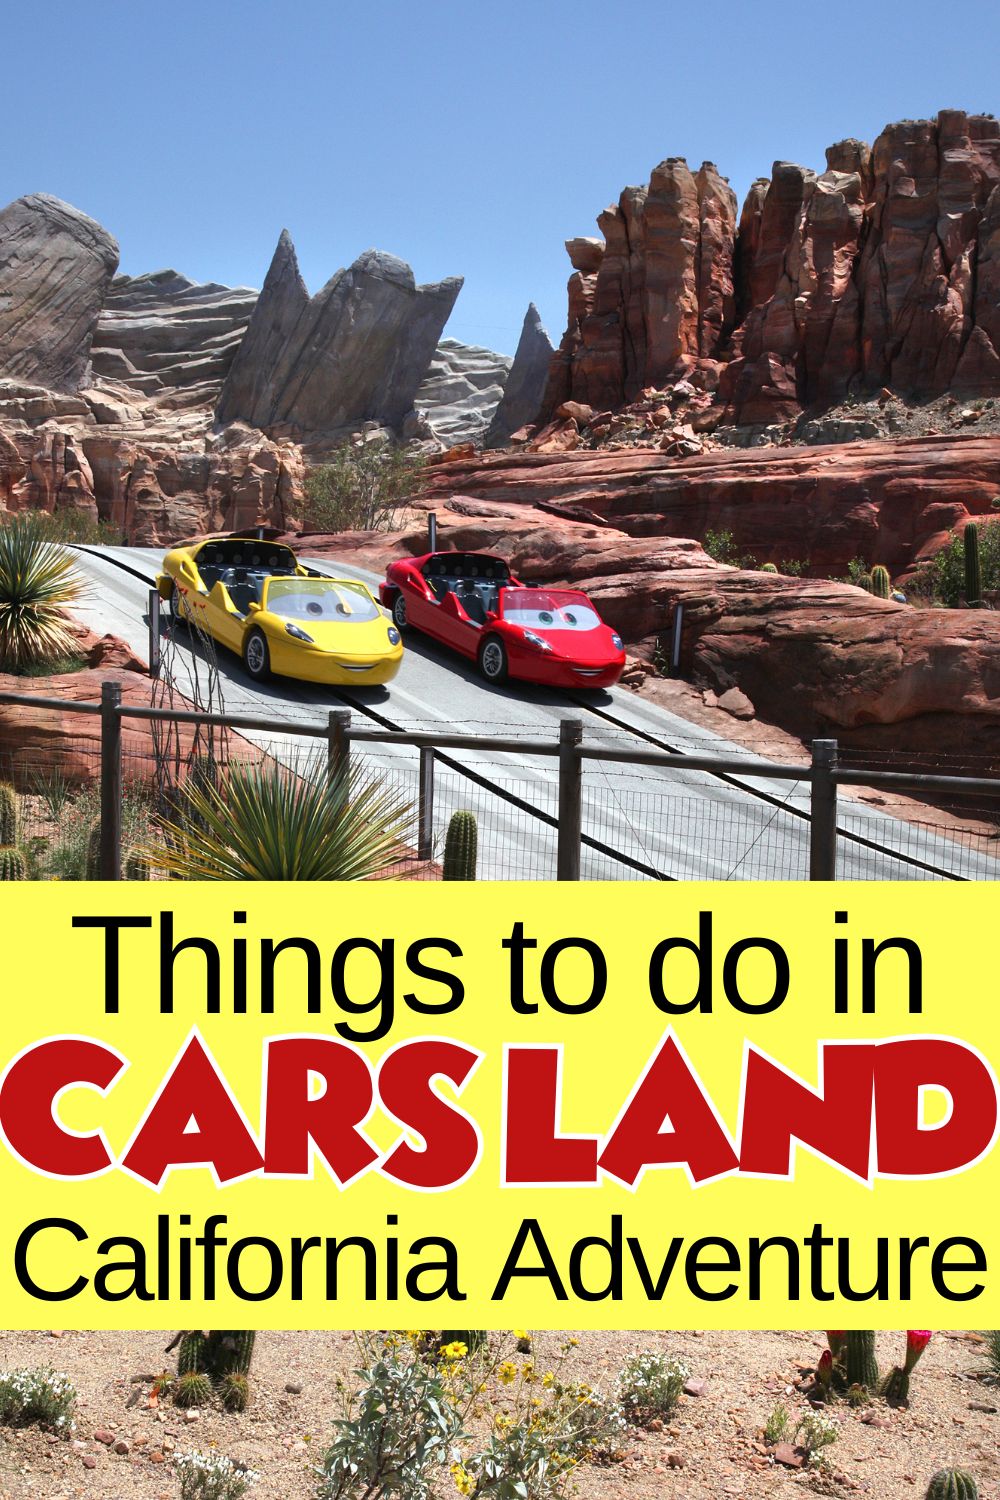 Things to do in Cars Land